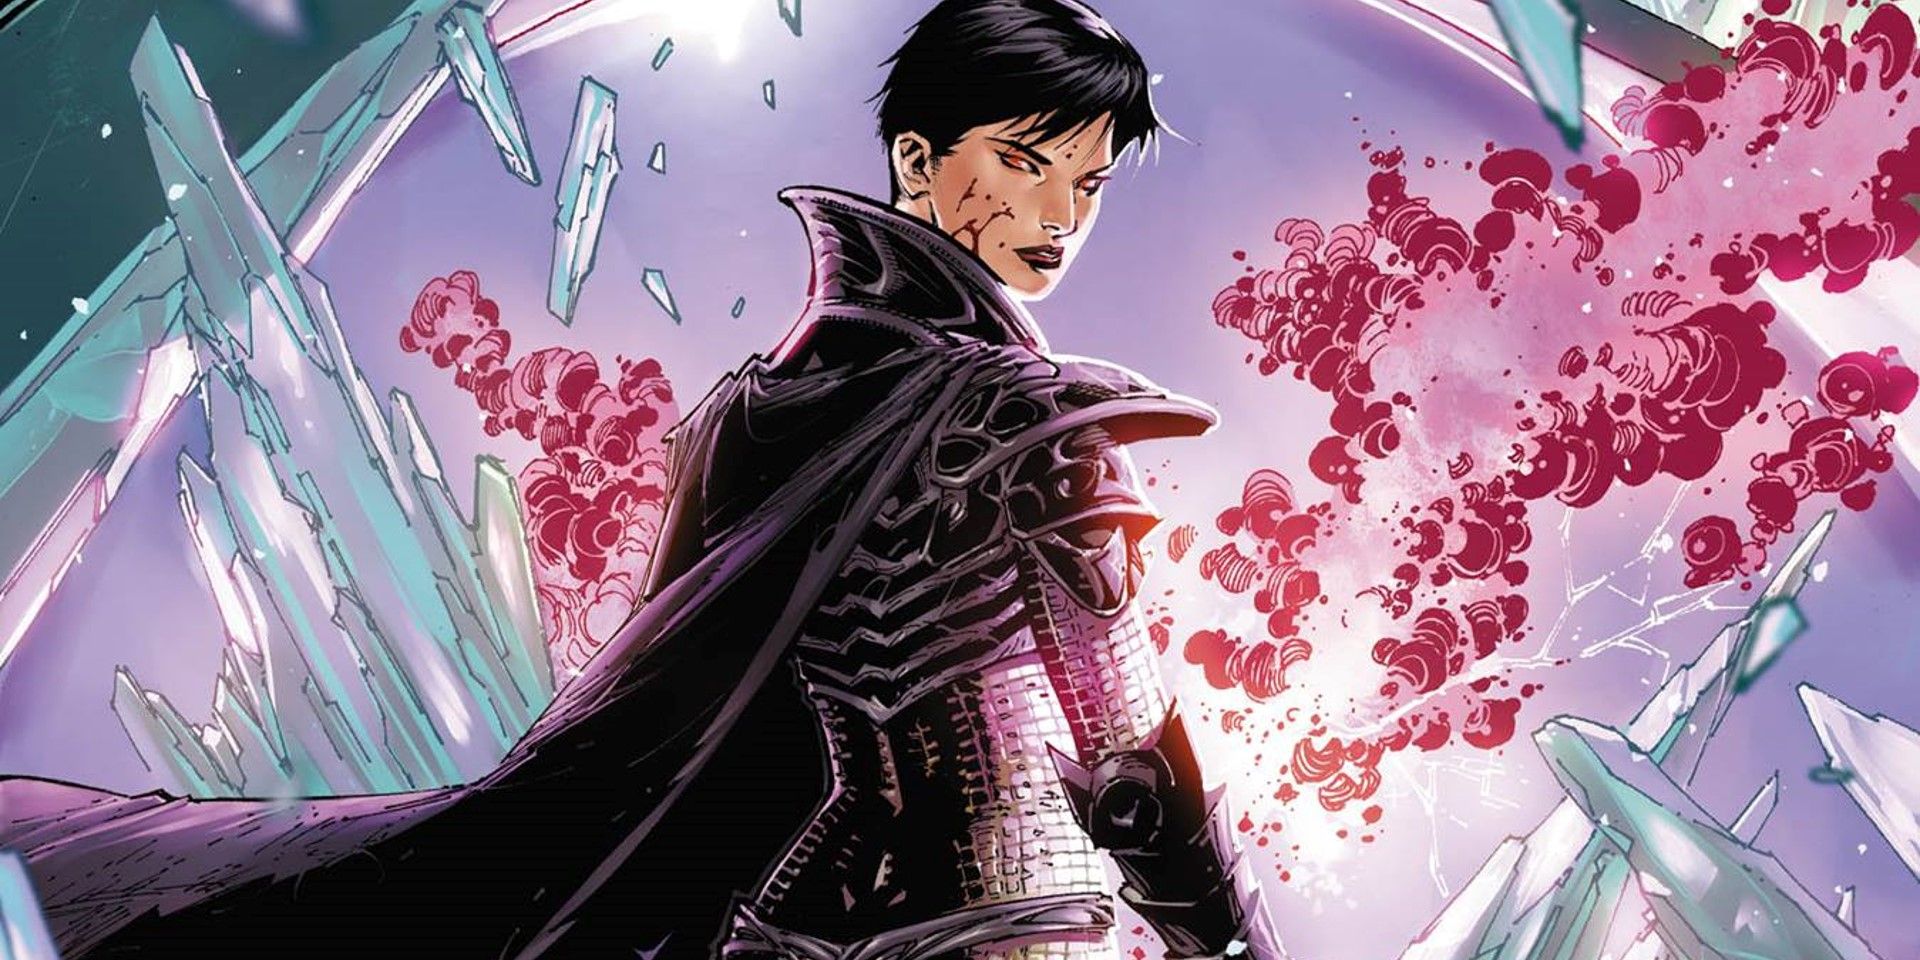 Faora Zod looking towards the reader in DC Comics